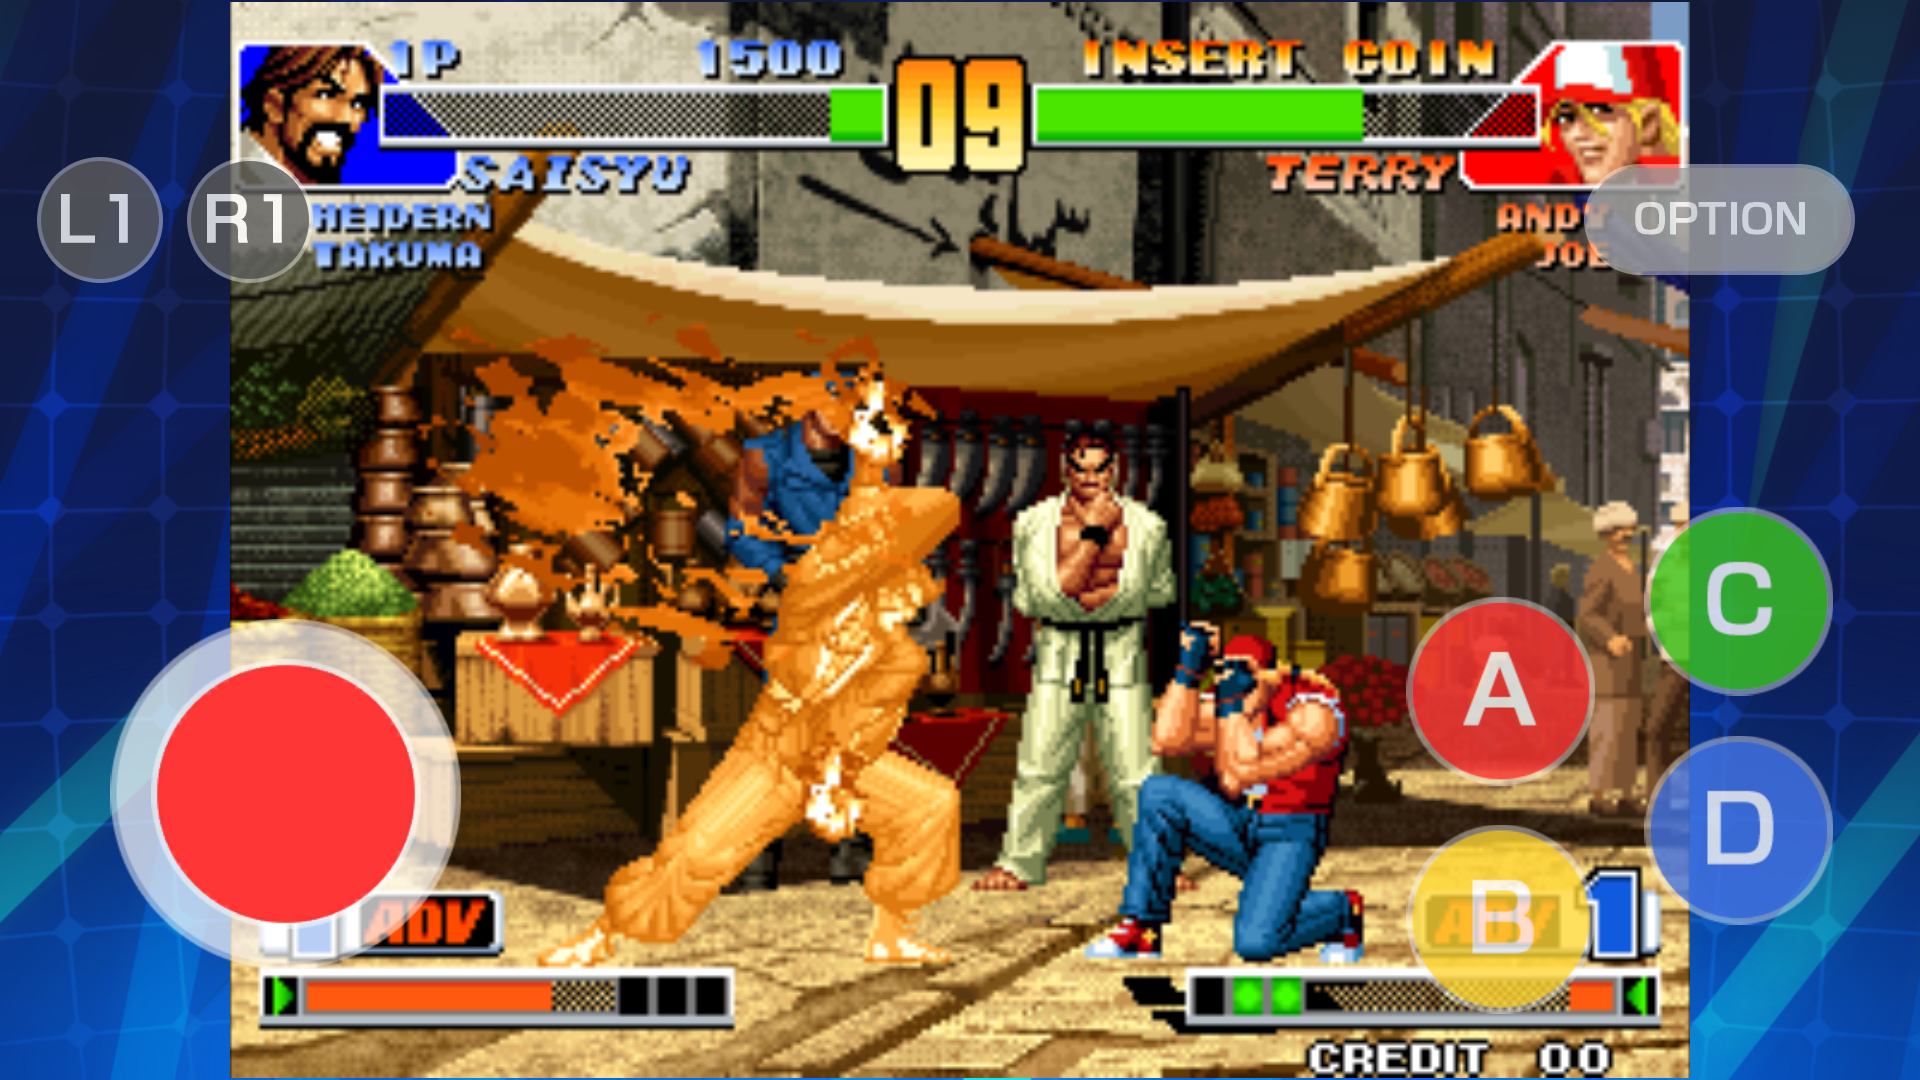 The King of Fighters 97 APK (Android Game) - Free Download